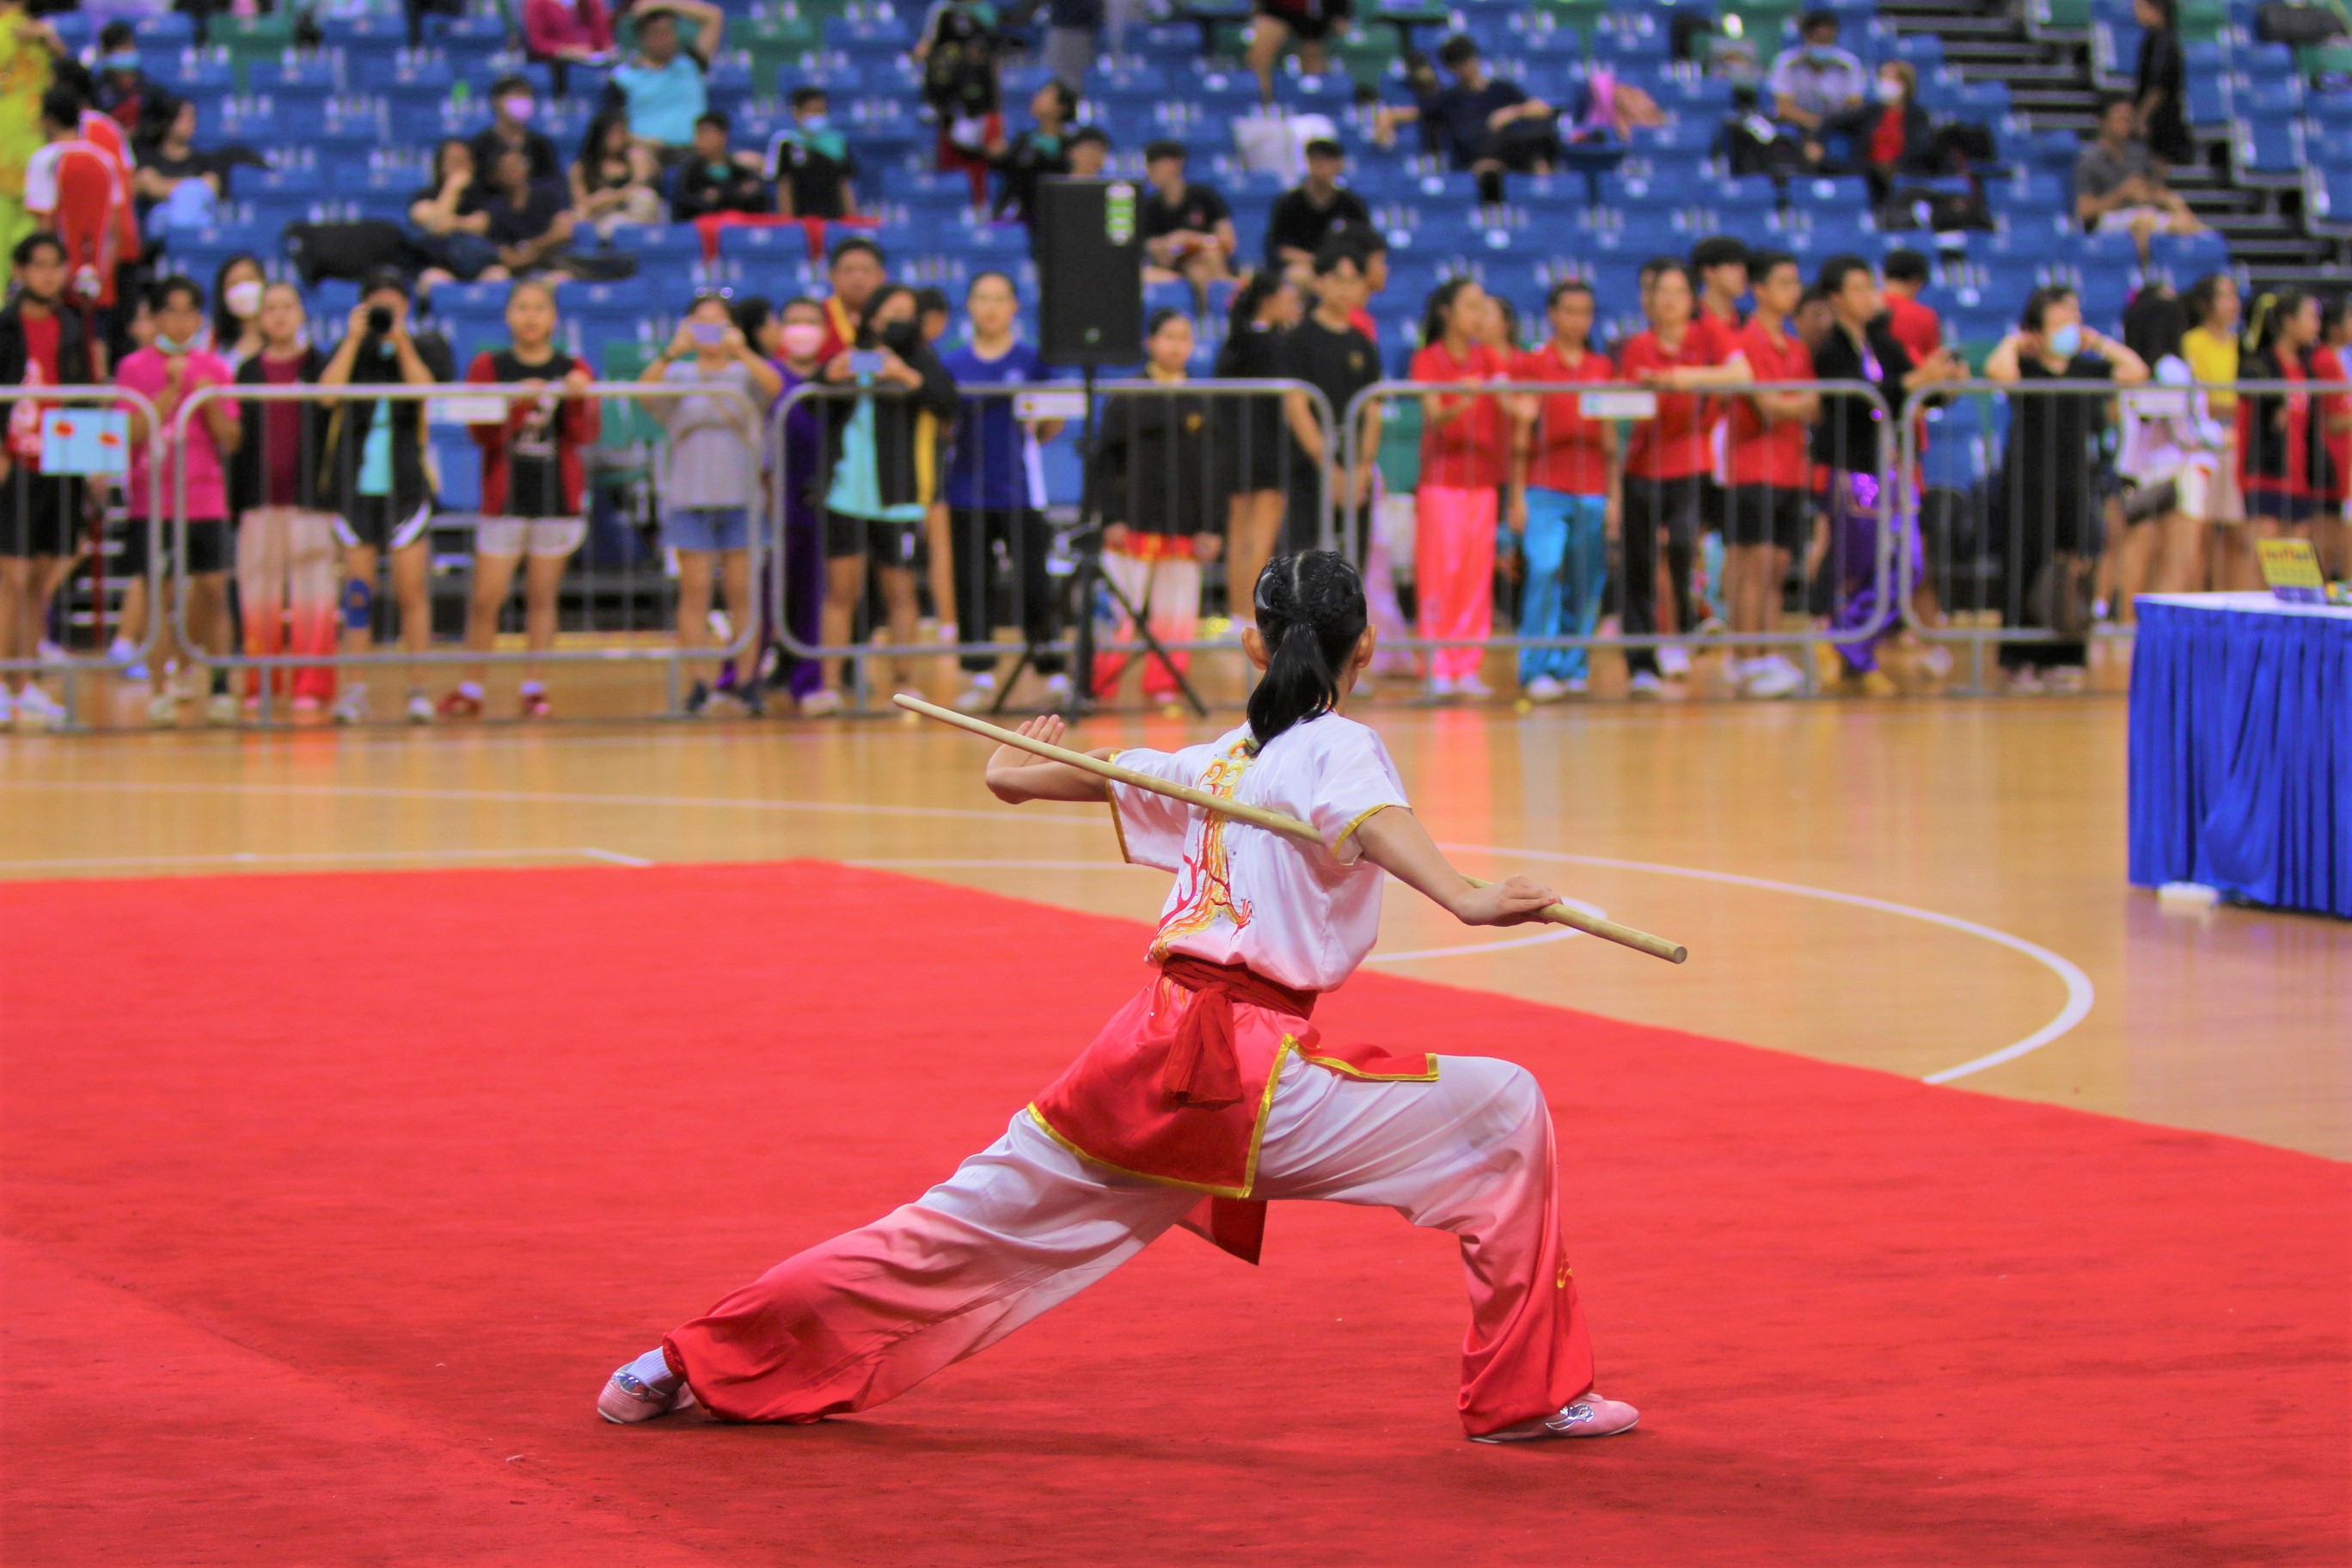 NSG 2023 Wushu : Highlights from A Division Boys' & Girls' Cudgel events!